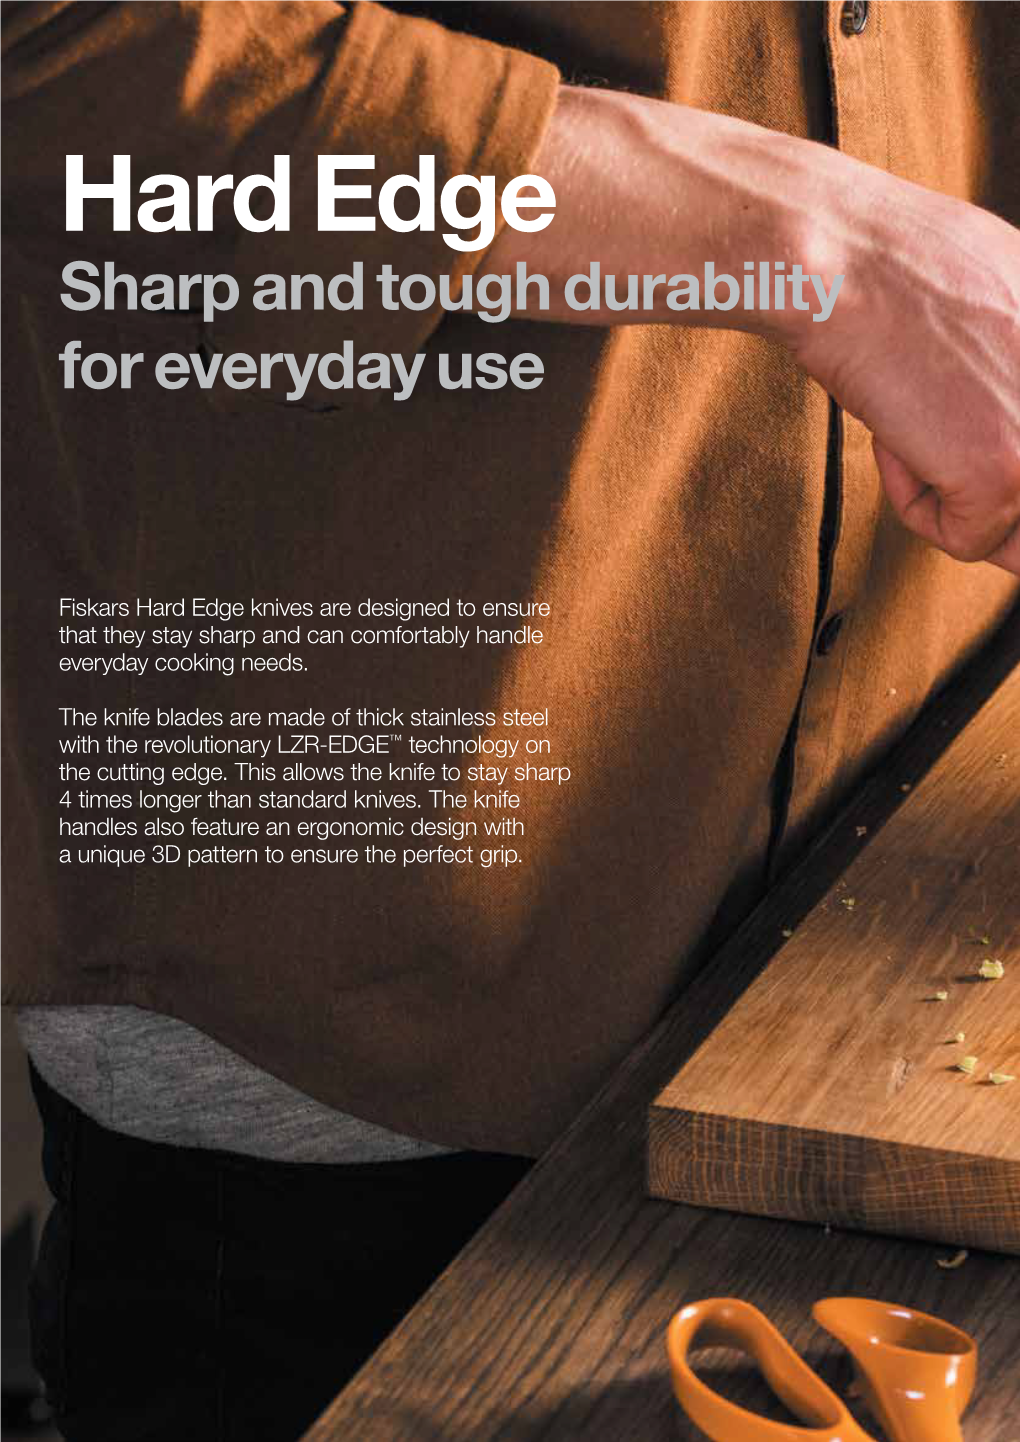 Hard Edge Sharp and Tough Durability for Everyday Use